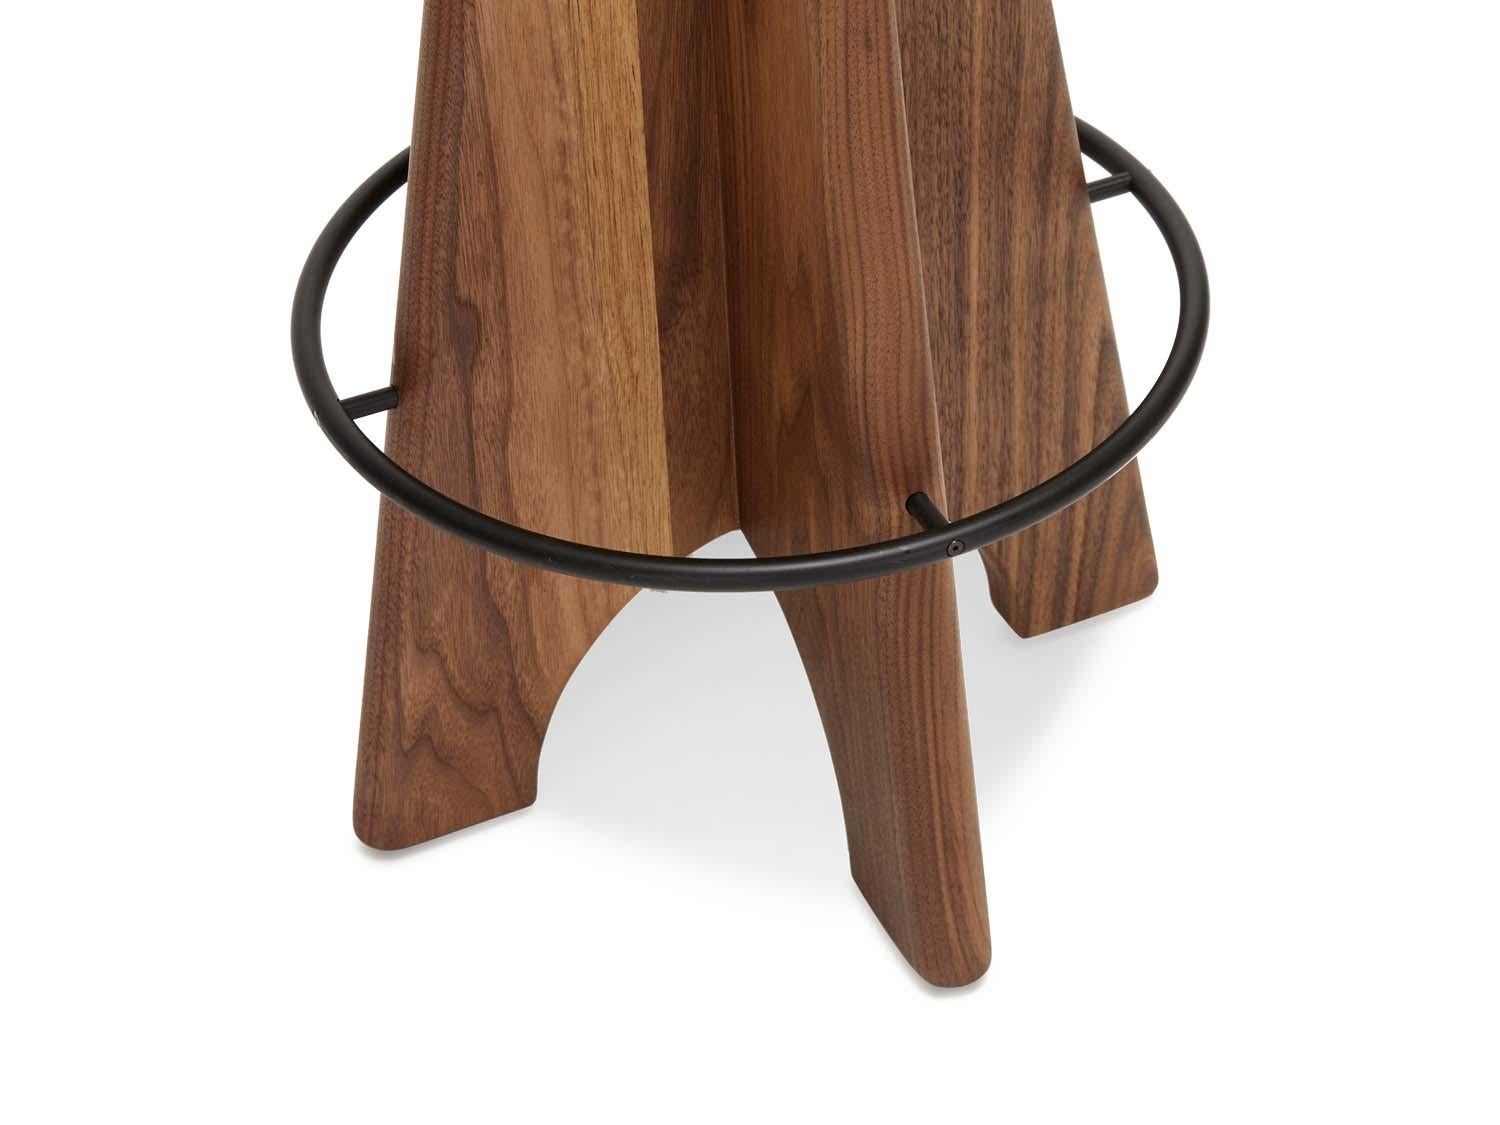 The Ojai barstool features a sculptural wood base, powdercoated metal footrest and an upholstered swivel seat.

 The Lawson-Fenning Collection is designed and handmade in Los Angeles, California. Reach out to discover what options are currently in